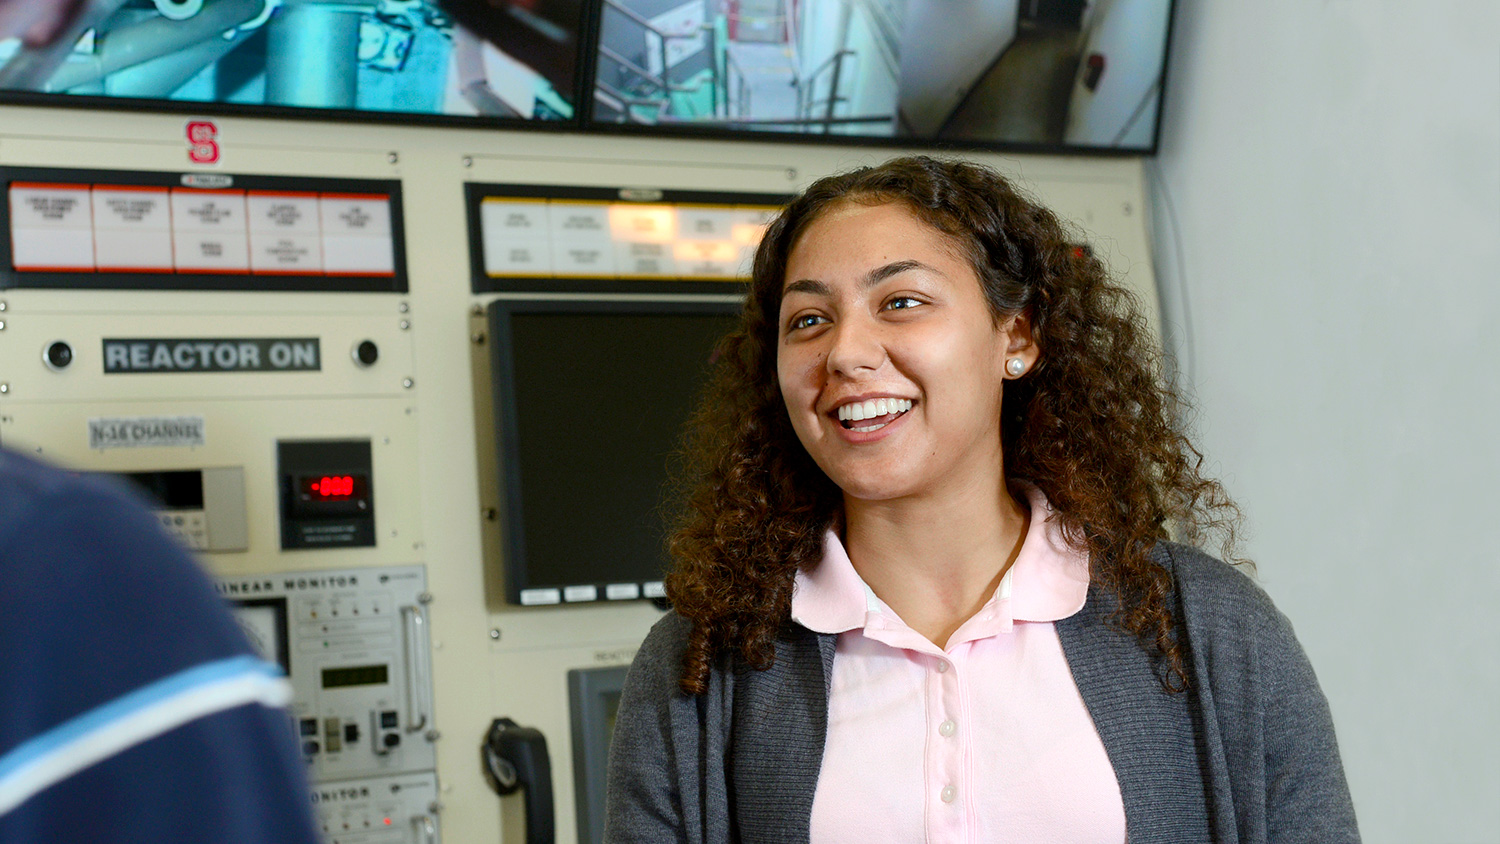 Jasmin Alsaied, a sophomore nuclear engineering student, works in nuclear reactor at Burlington Labs.